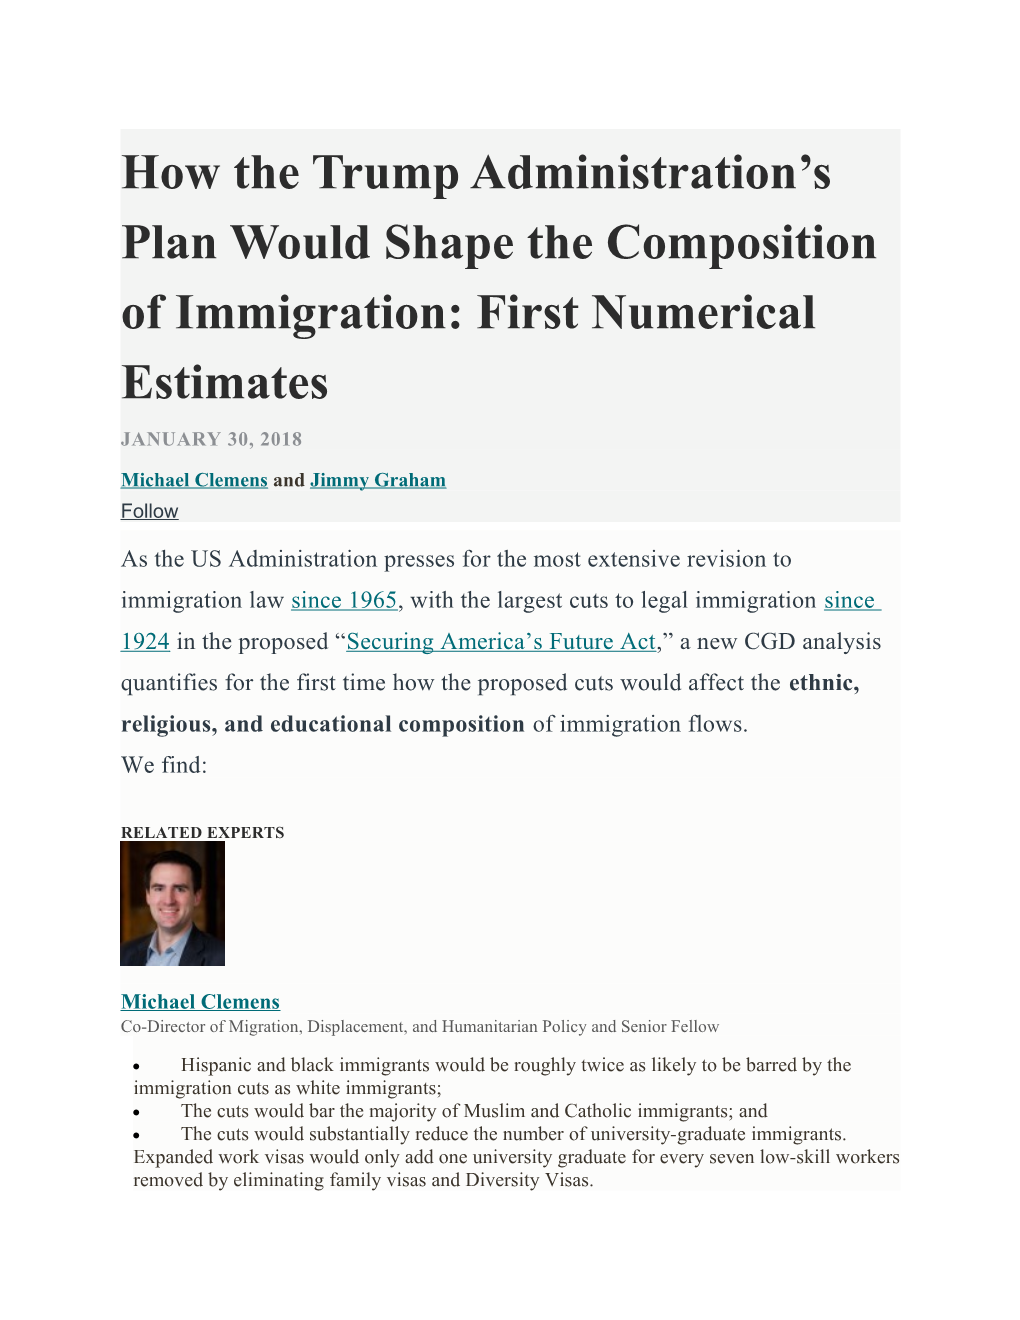 How the Trump Administration S Plan Would Shape the Composition of Immigration: First